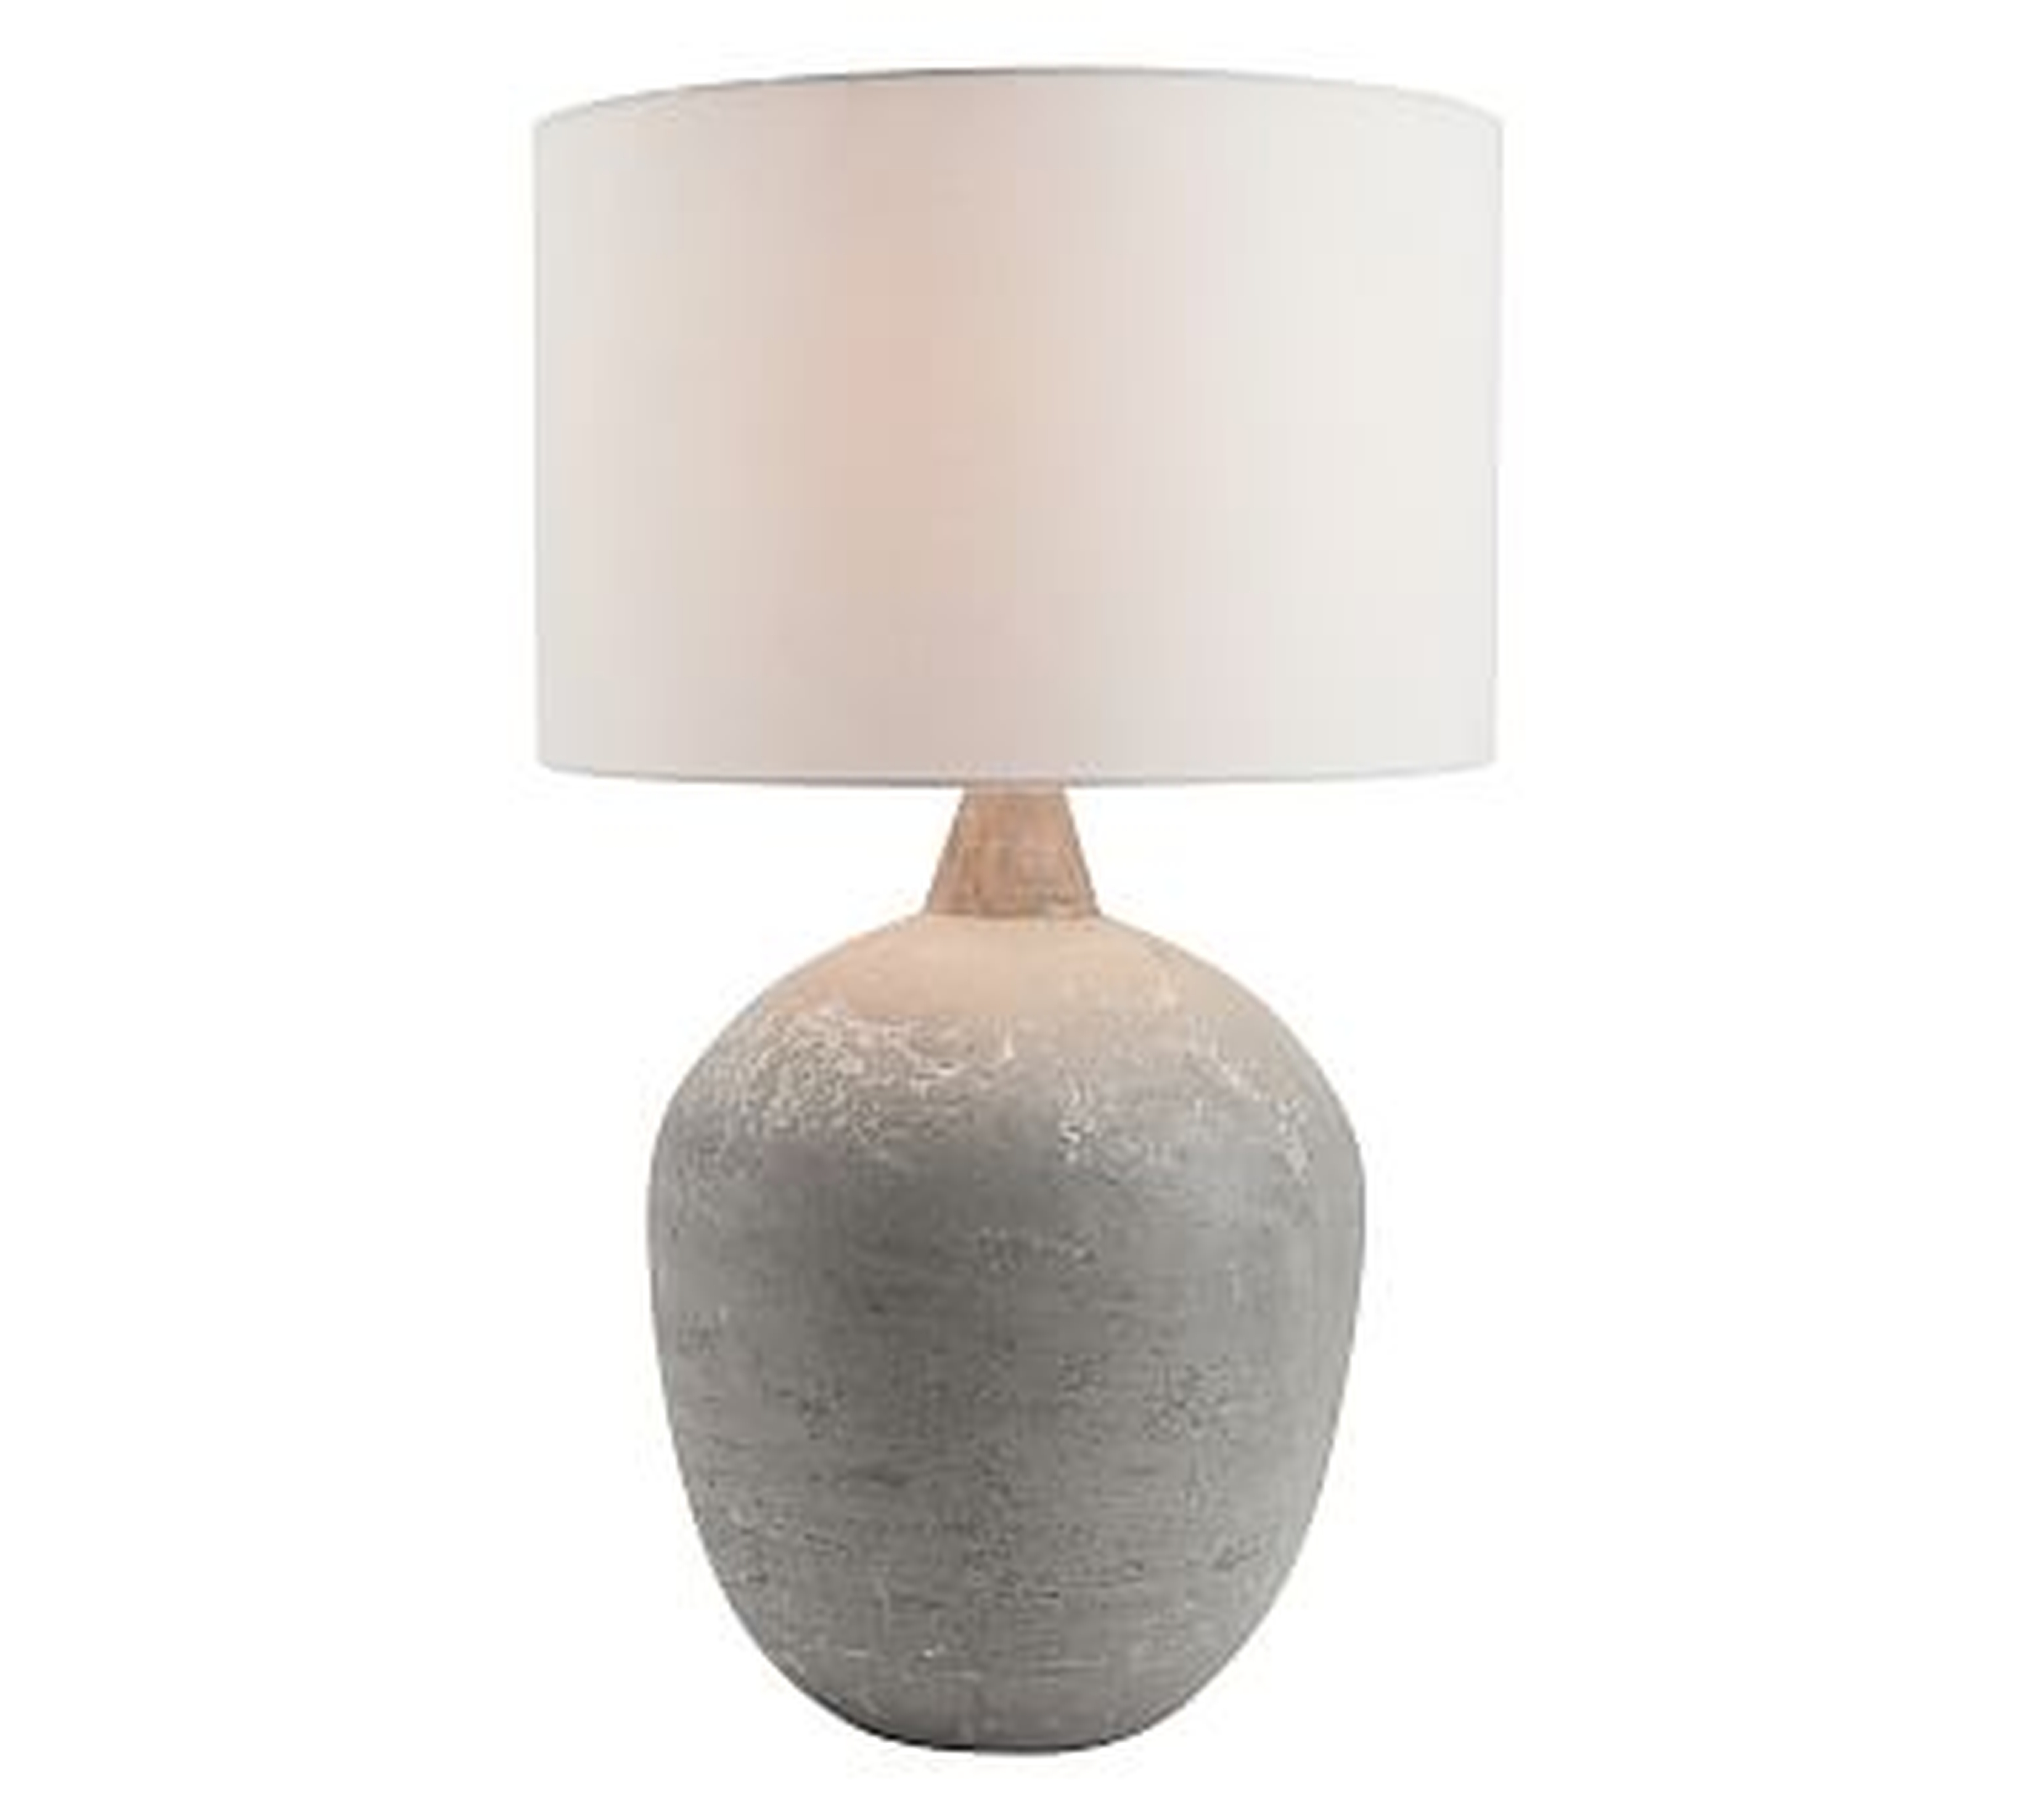 Clive 30" Small Table Lamp with Medium Gallery Straight Sided Shade, Gray Base/White Shade - Pottery Barn